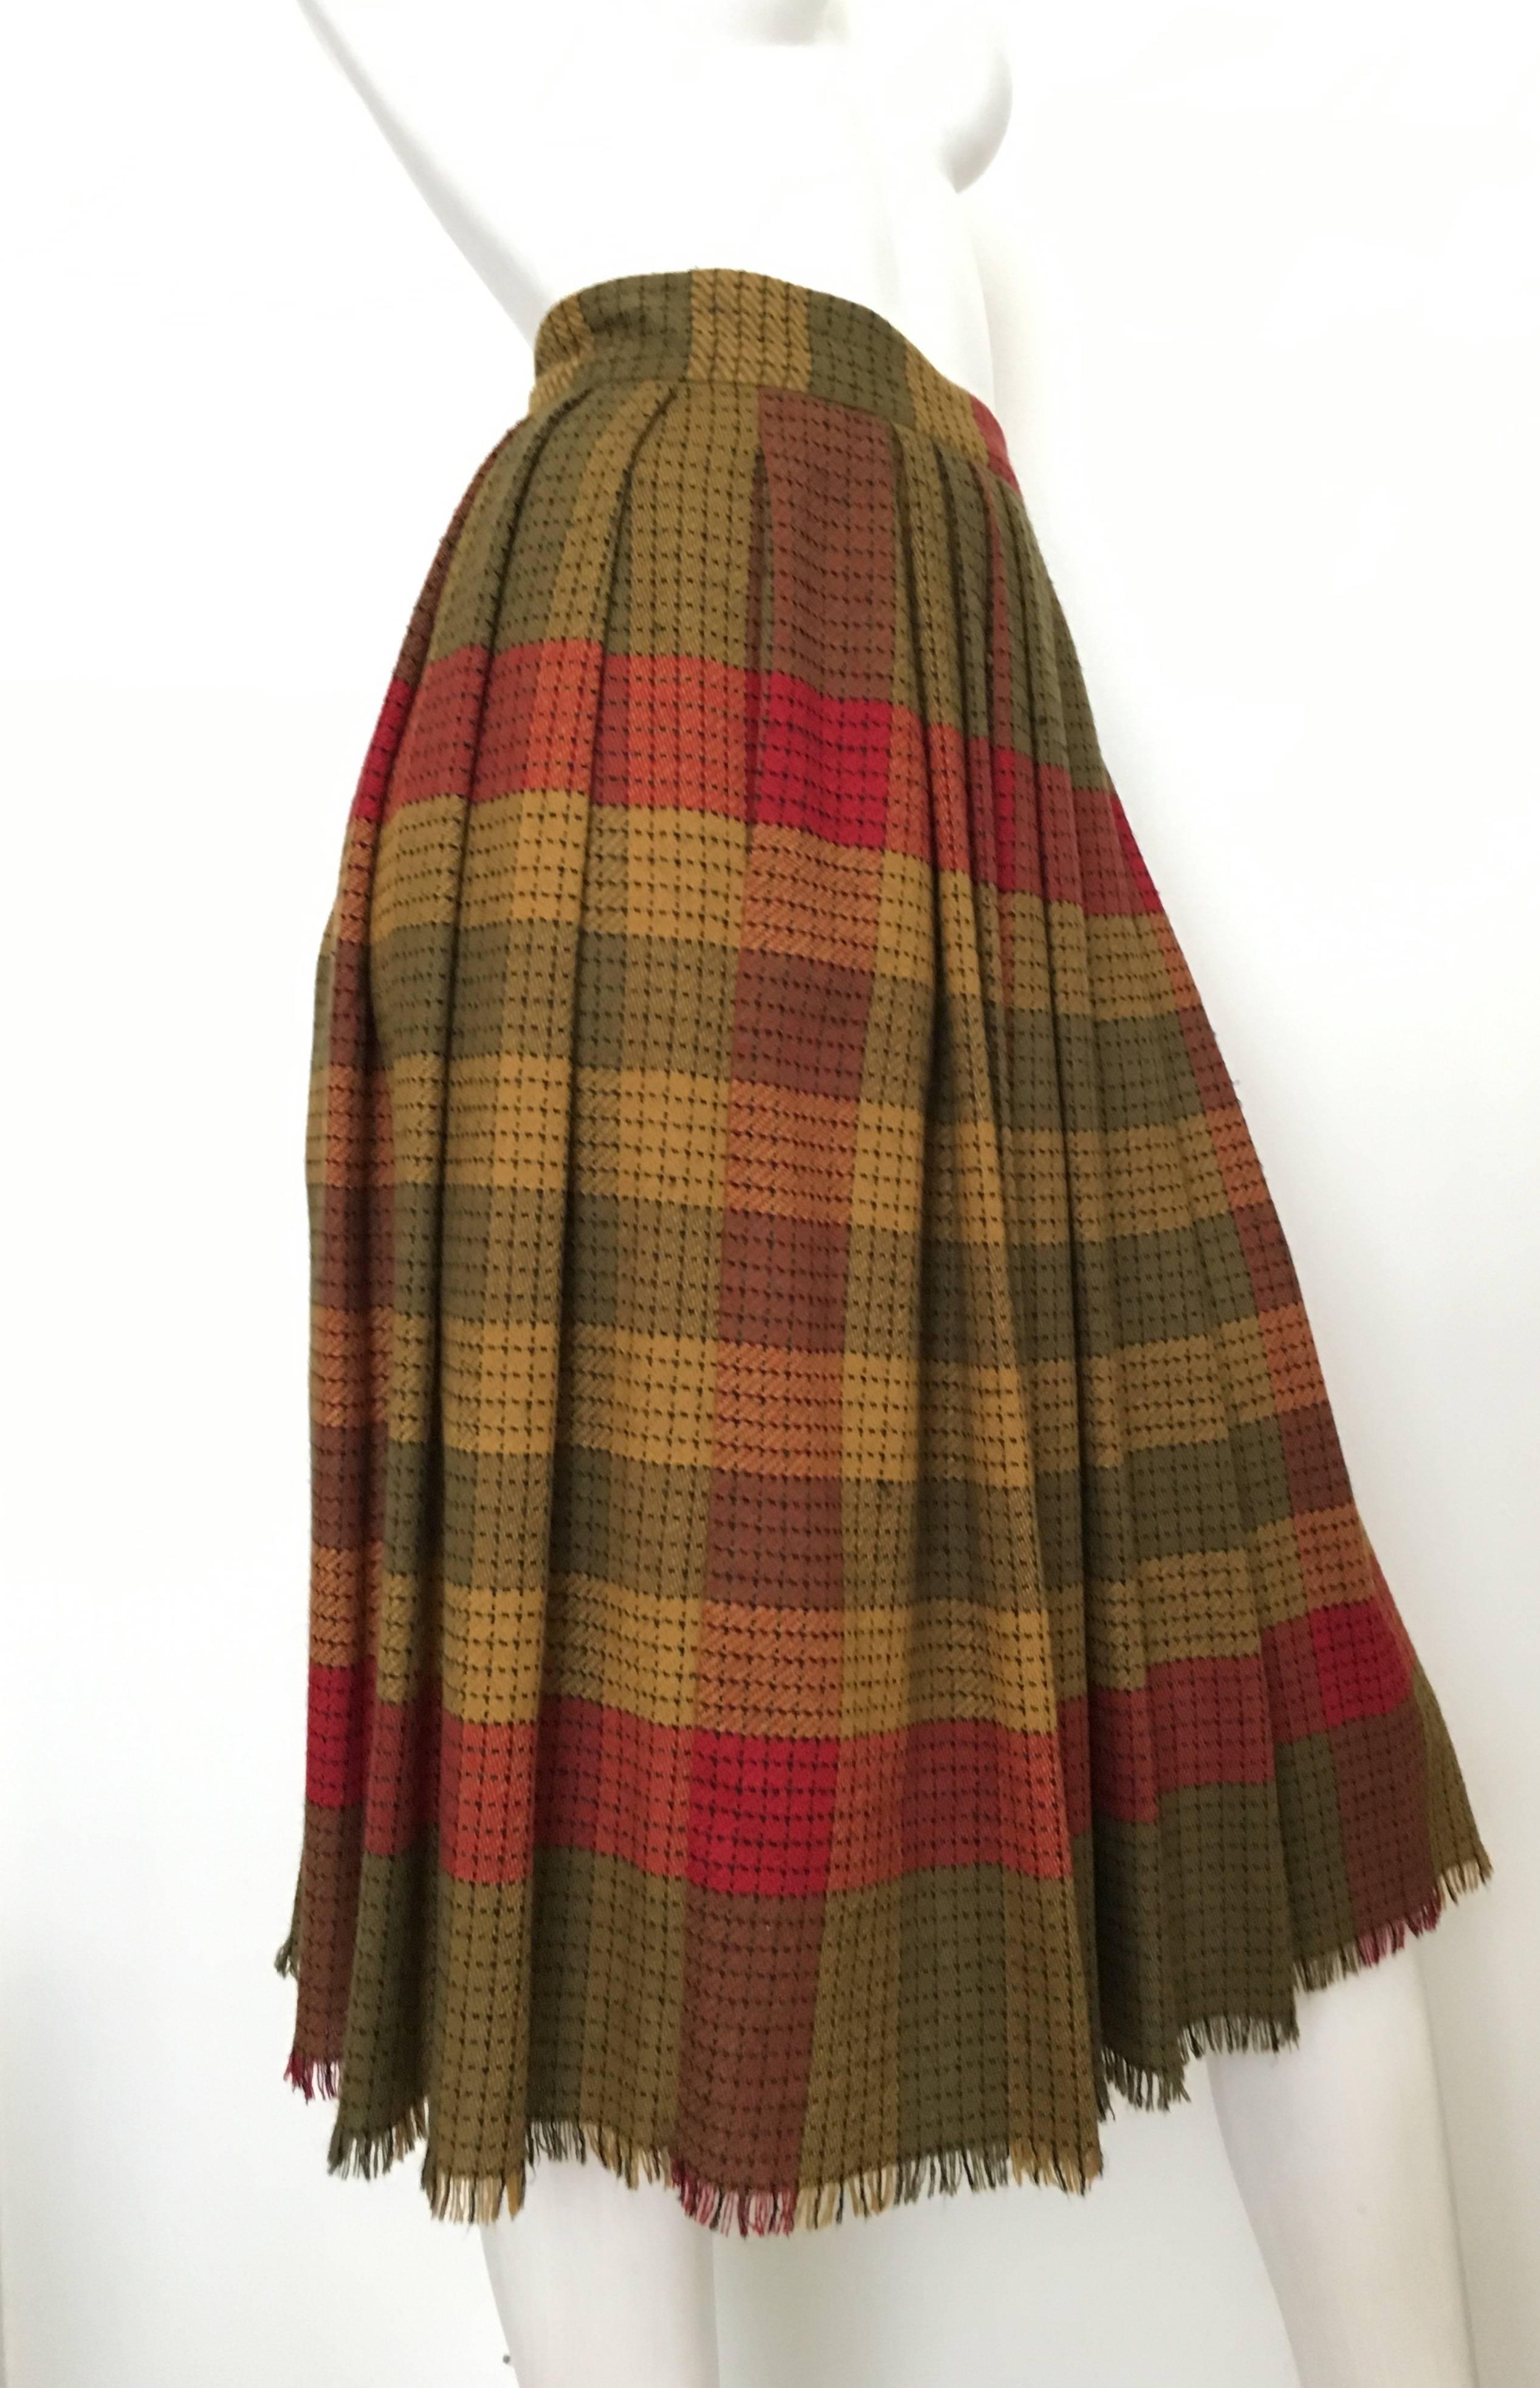 Emanuel Ungaro Parallele Paris 1980s wool plaid button up pleated skirt with single pocket is a size 4.  Ladies please grab your tape measure so you can properly measure your waistline & hips to make certain this treasure will fit your lovely